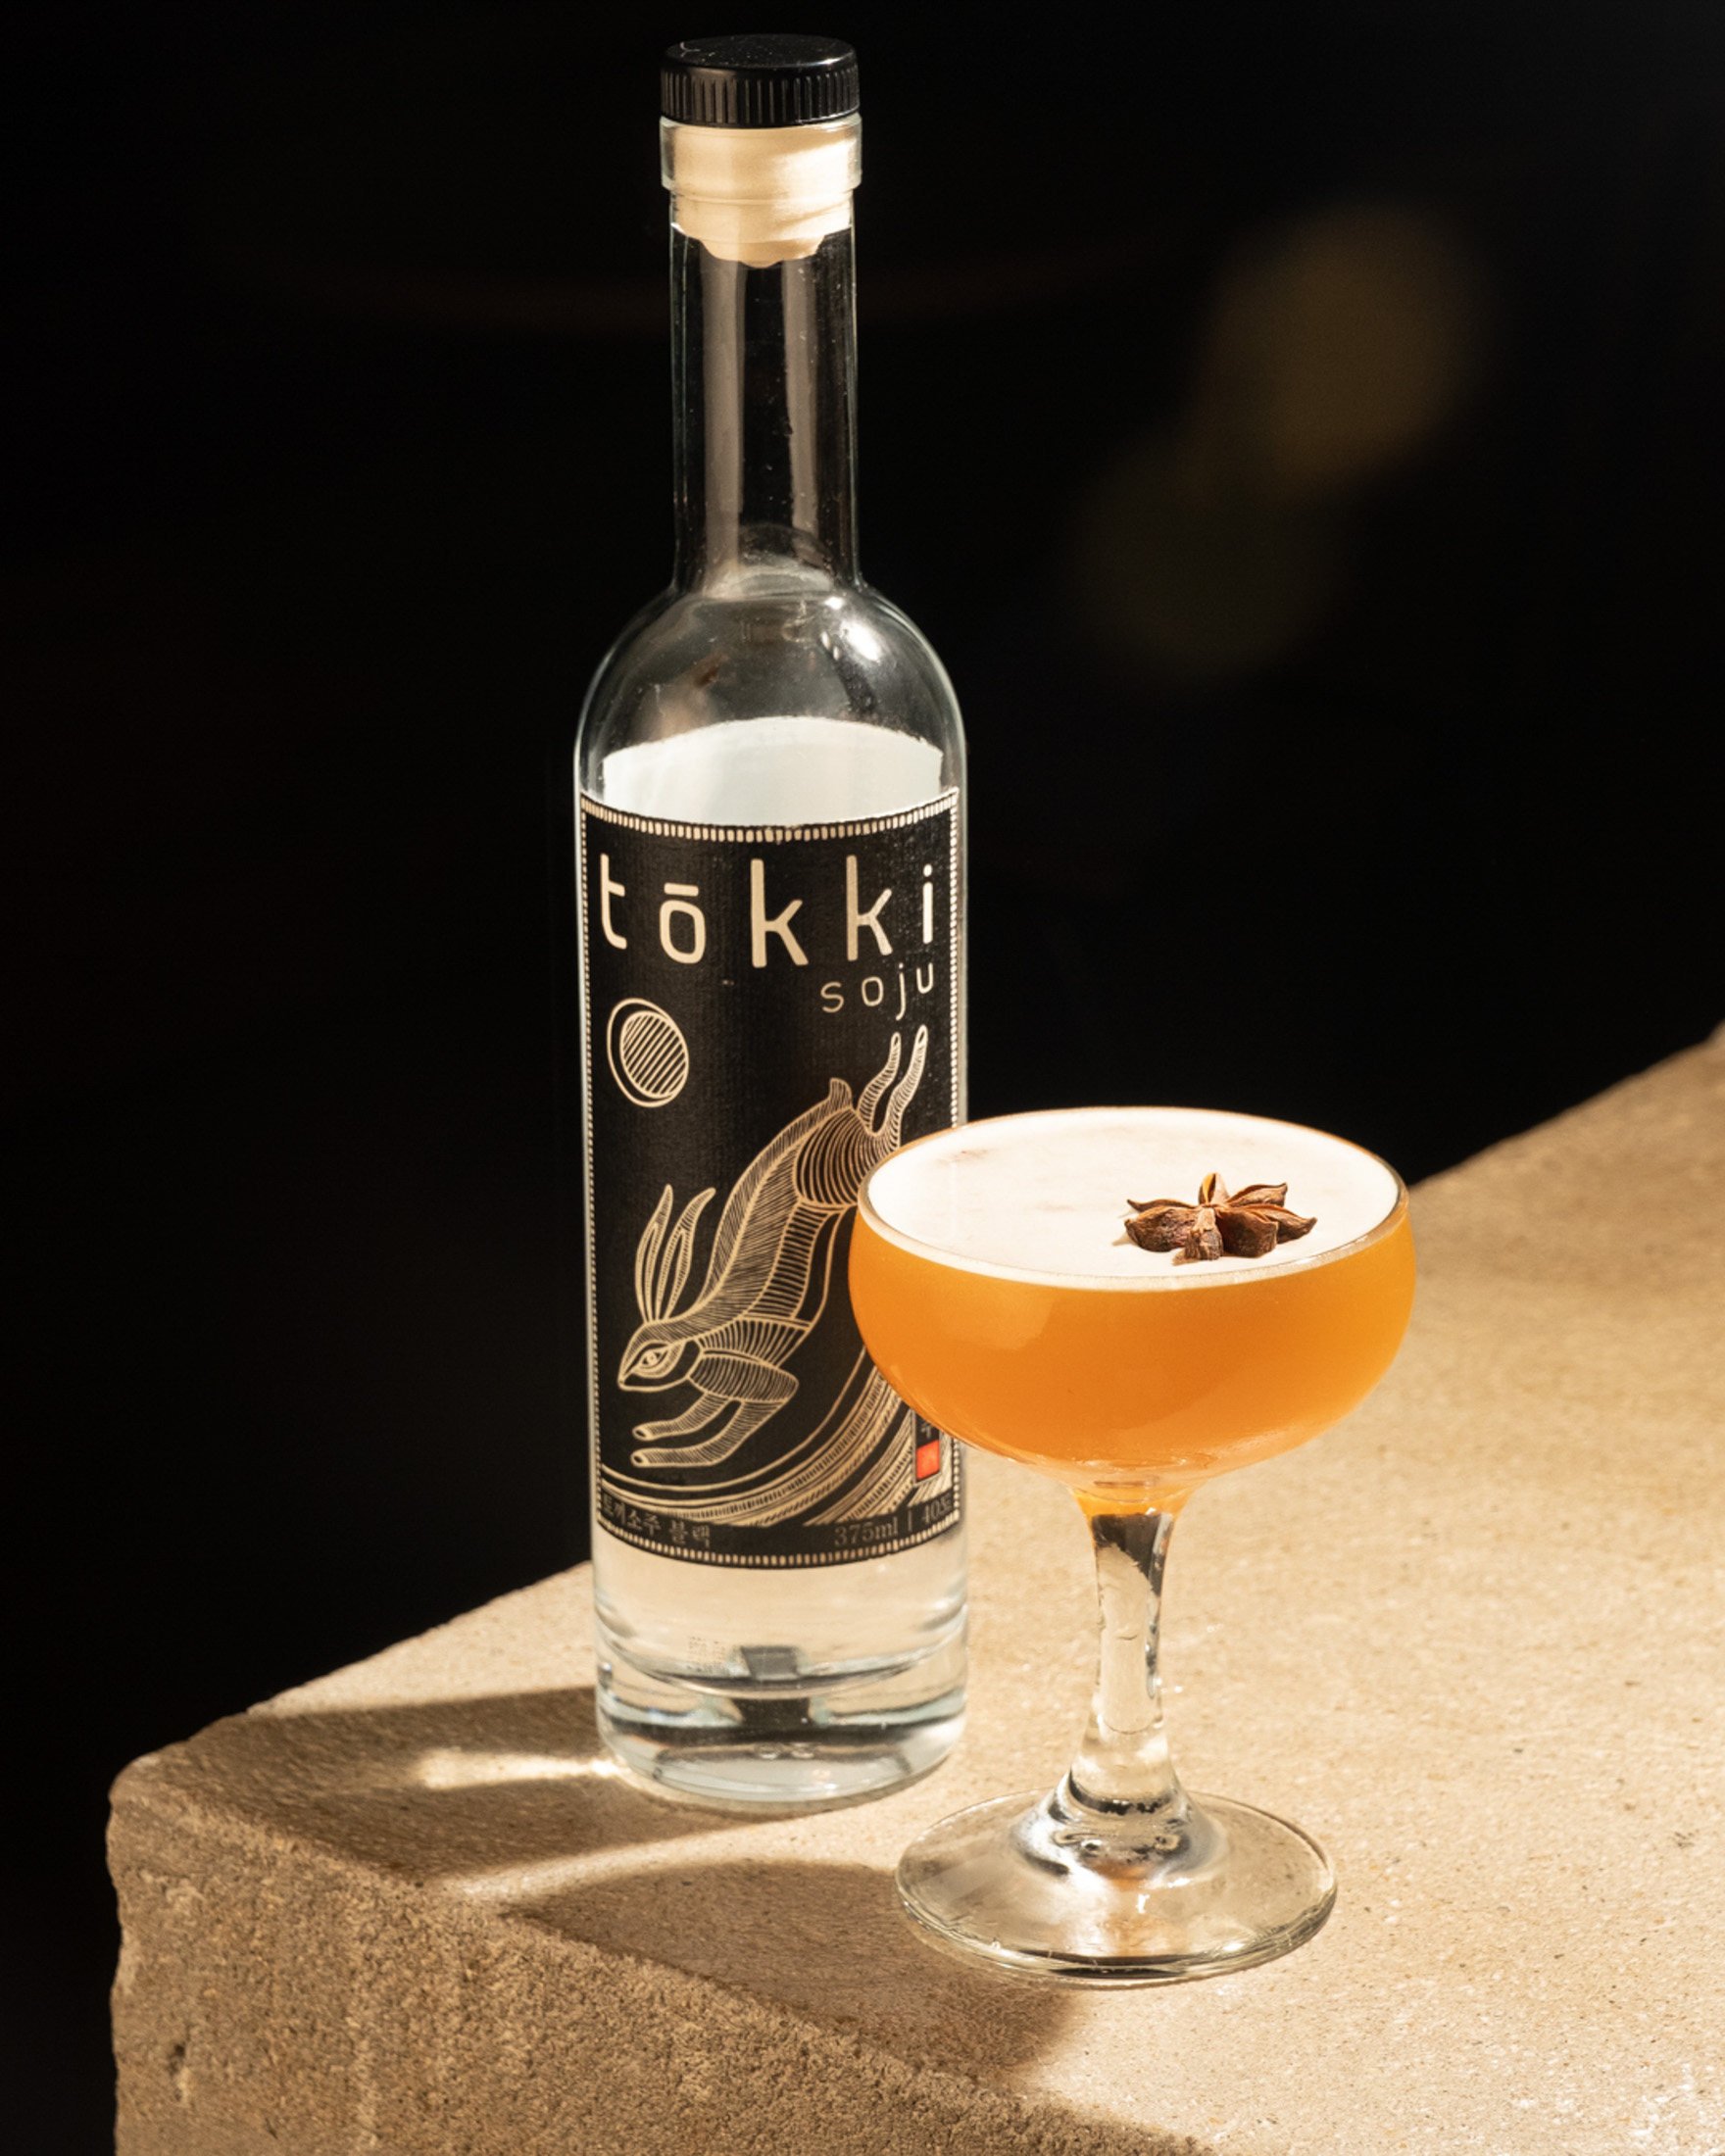 Tokki Soju’s Black Label soju is used at some of the World’s 50 Best Bars. As craft versions of the Korean distilled spirit go global, we look at some of the artisans leading the charge. Photo: Tokki Soju